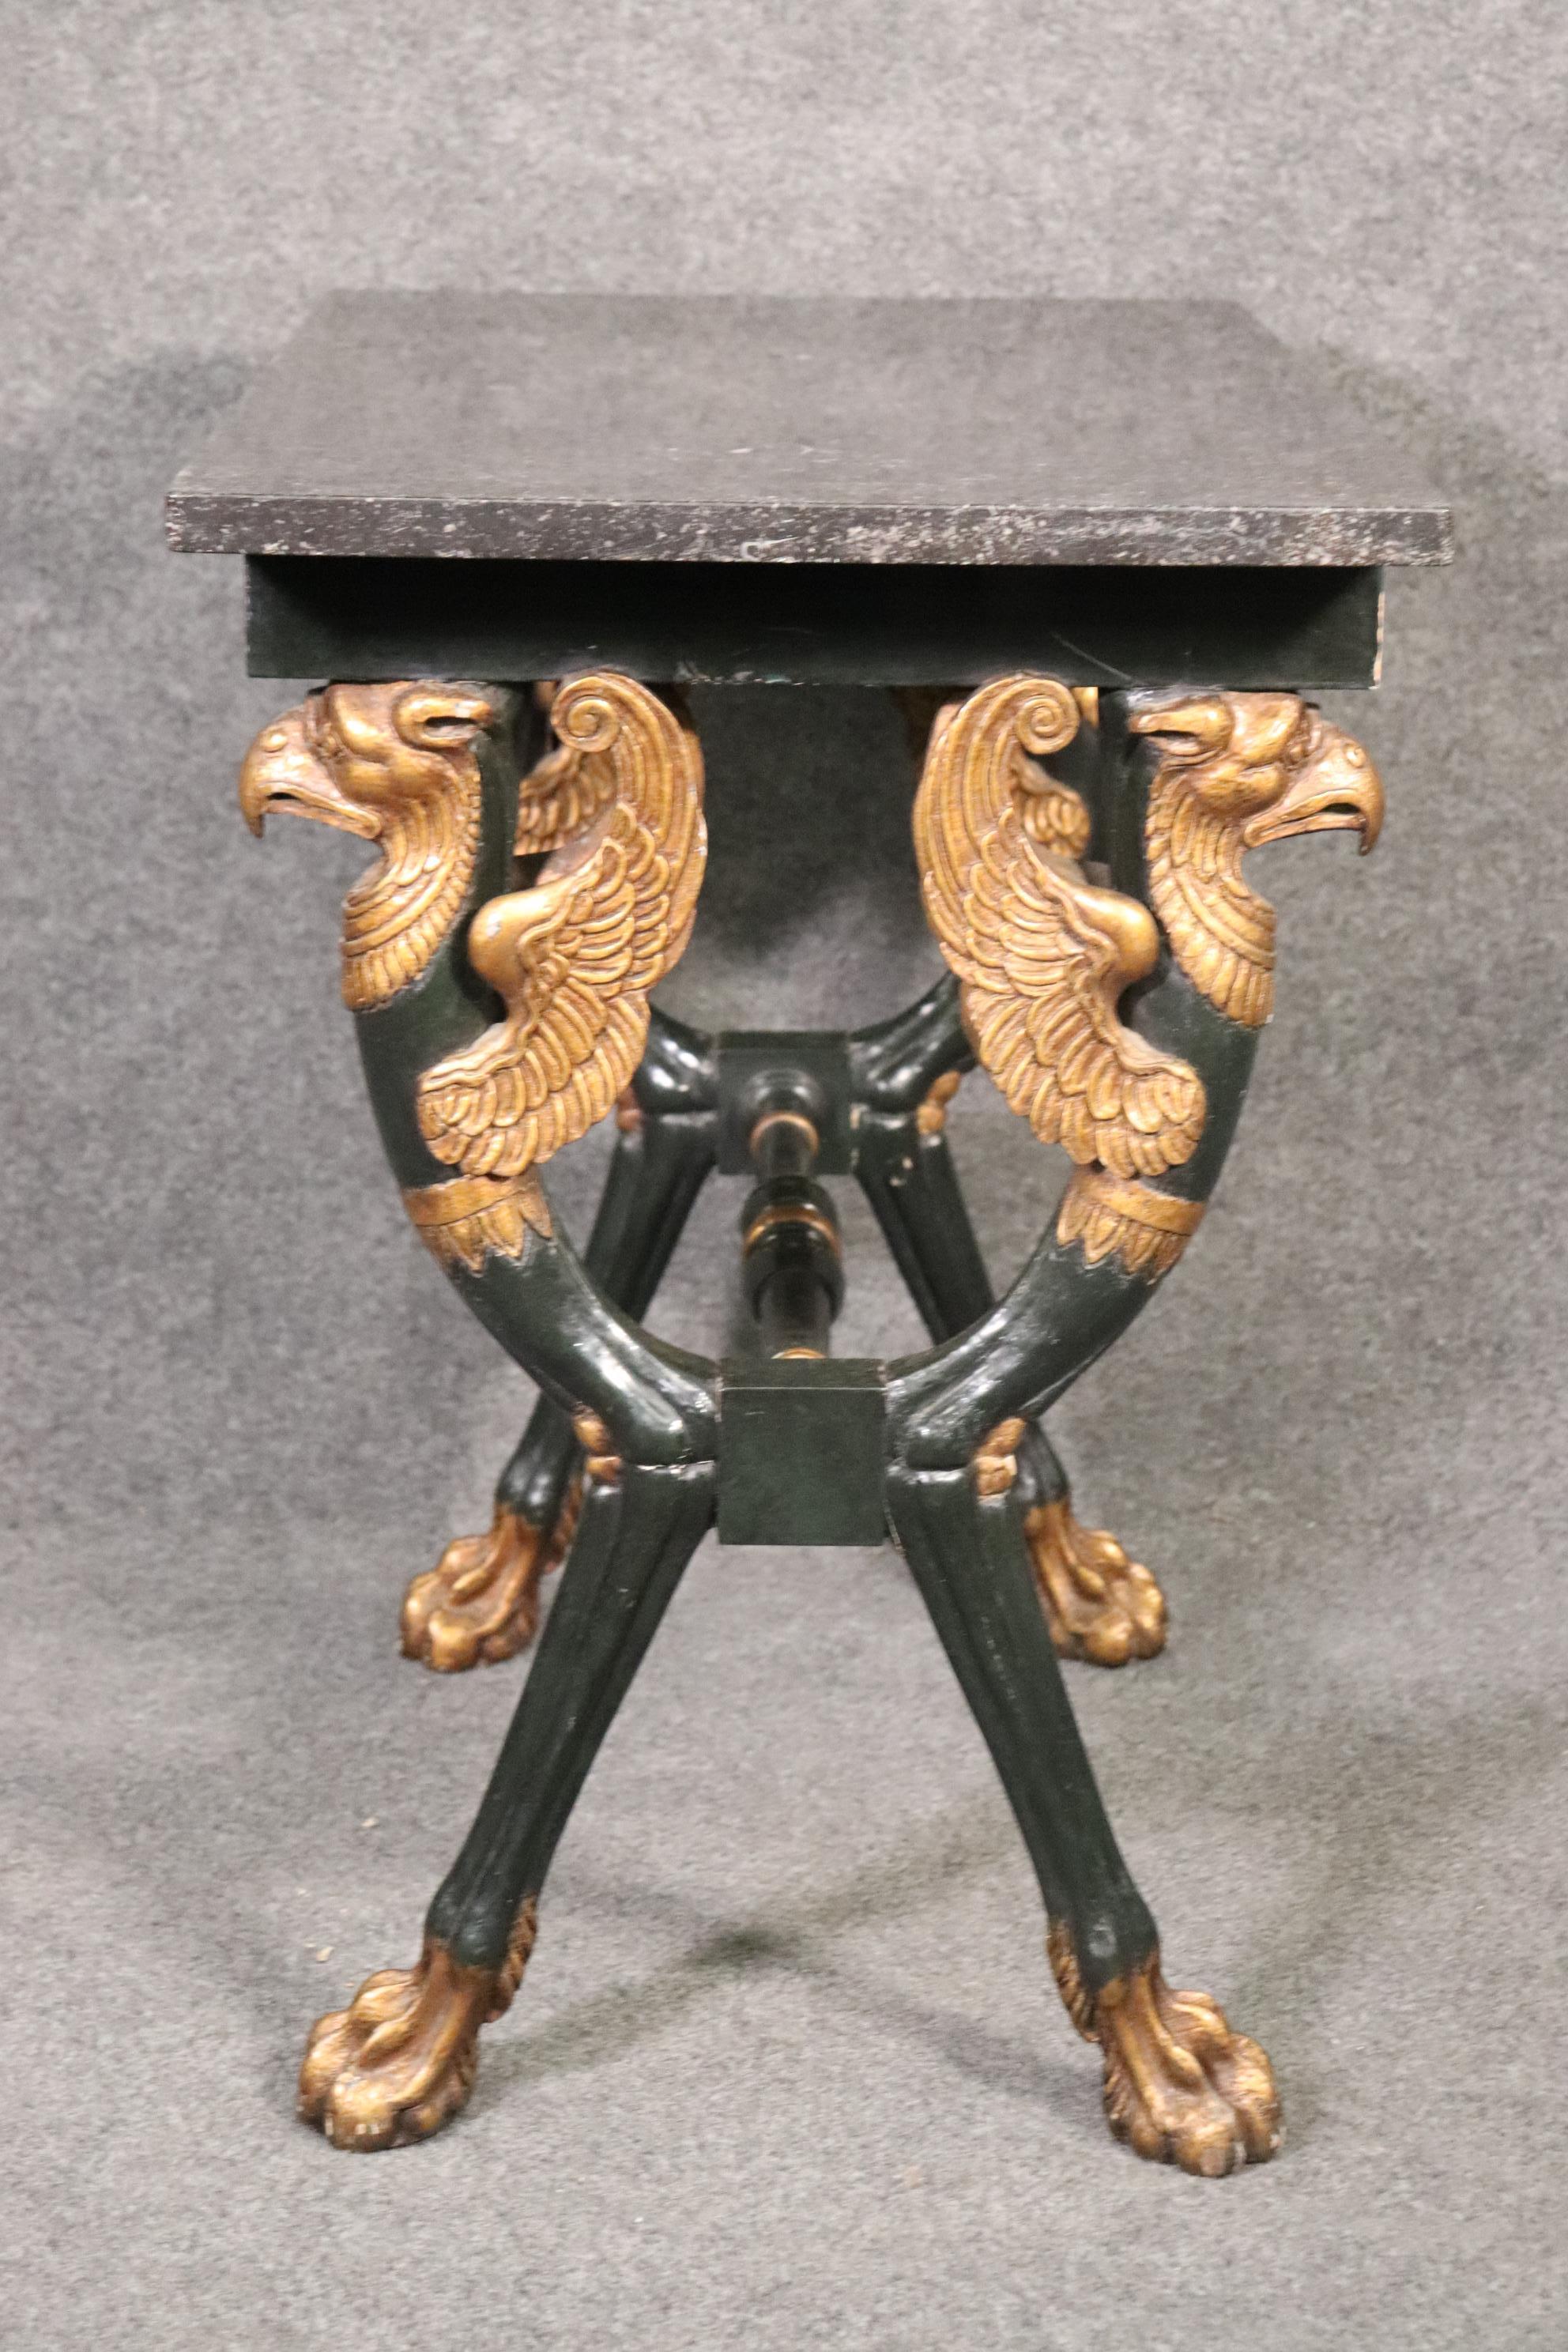 Dimensions- H: 28 3/4in W: 35in D: 21 inches
This Maison Jansen Style Carved Eagle Marble Top Console Table, Server, or Entryway Table is an extremely unique piece all around. Starting with the highly unusual carved figural eagles on each corner of